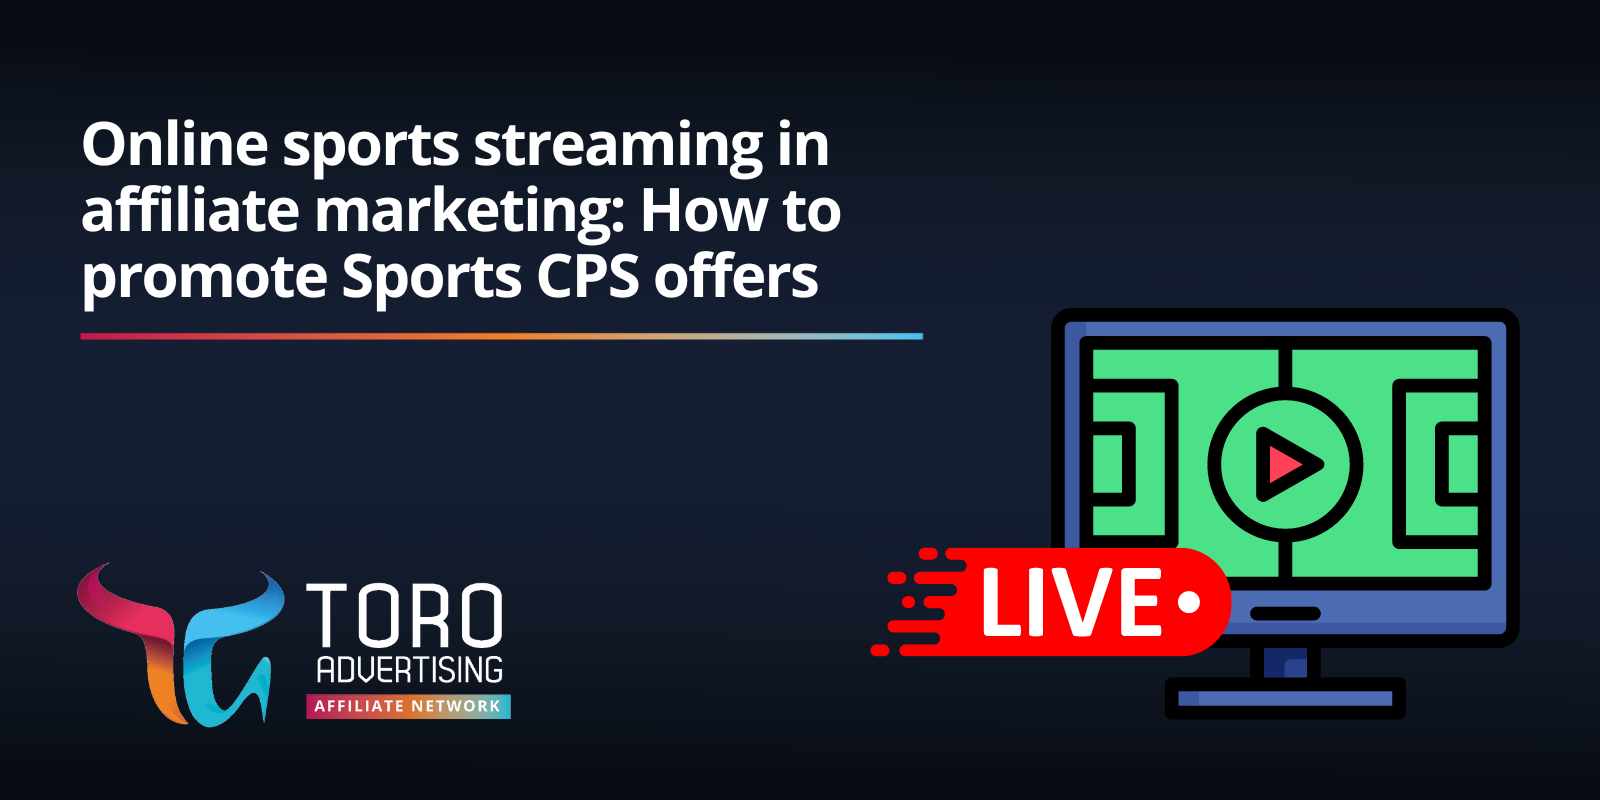 Online sports streaming in affiliate marketing: how to promote sports CPS offers